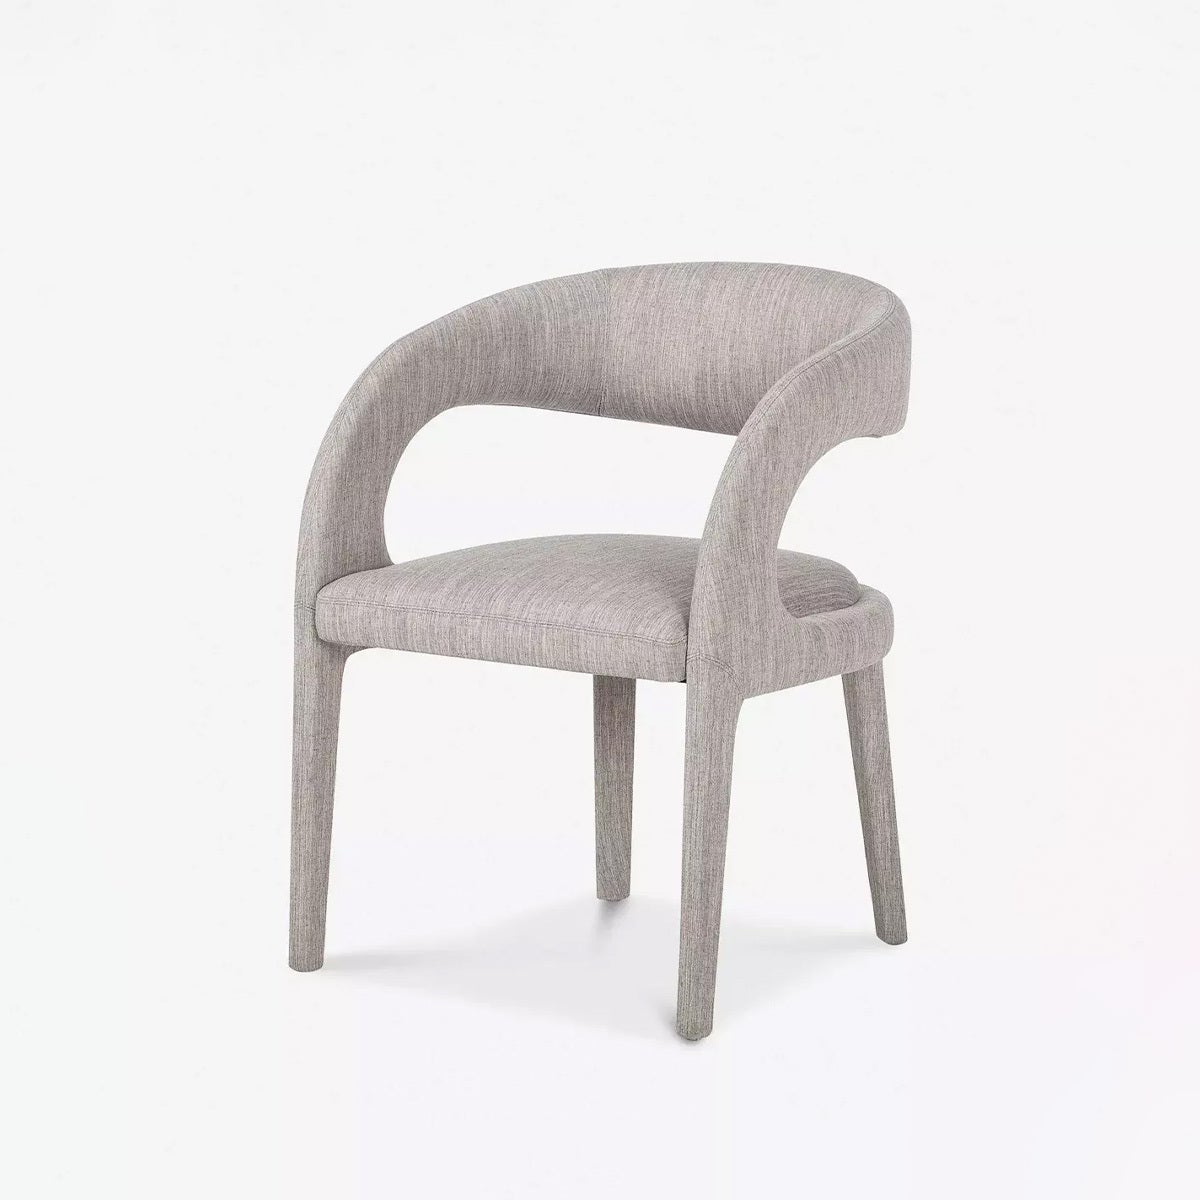 Gray linen blend low profile, barrel back dining chair by Lulu and Georgia